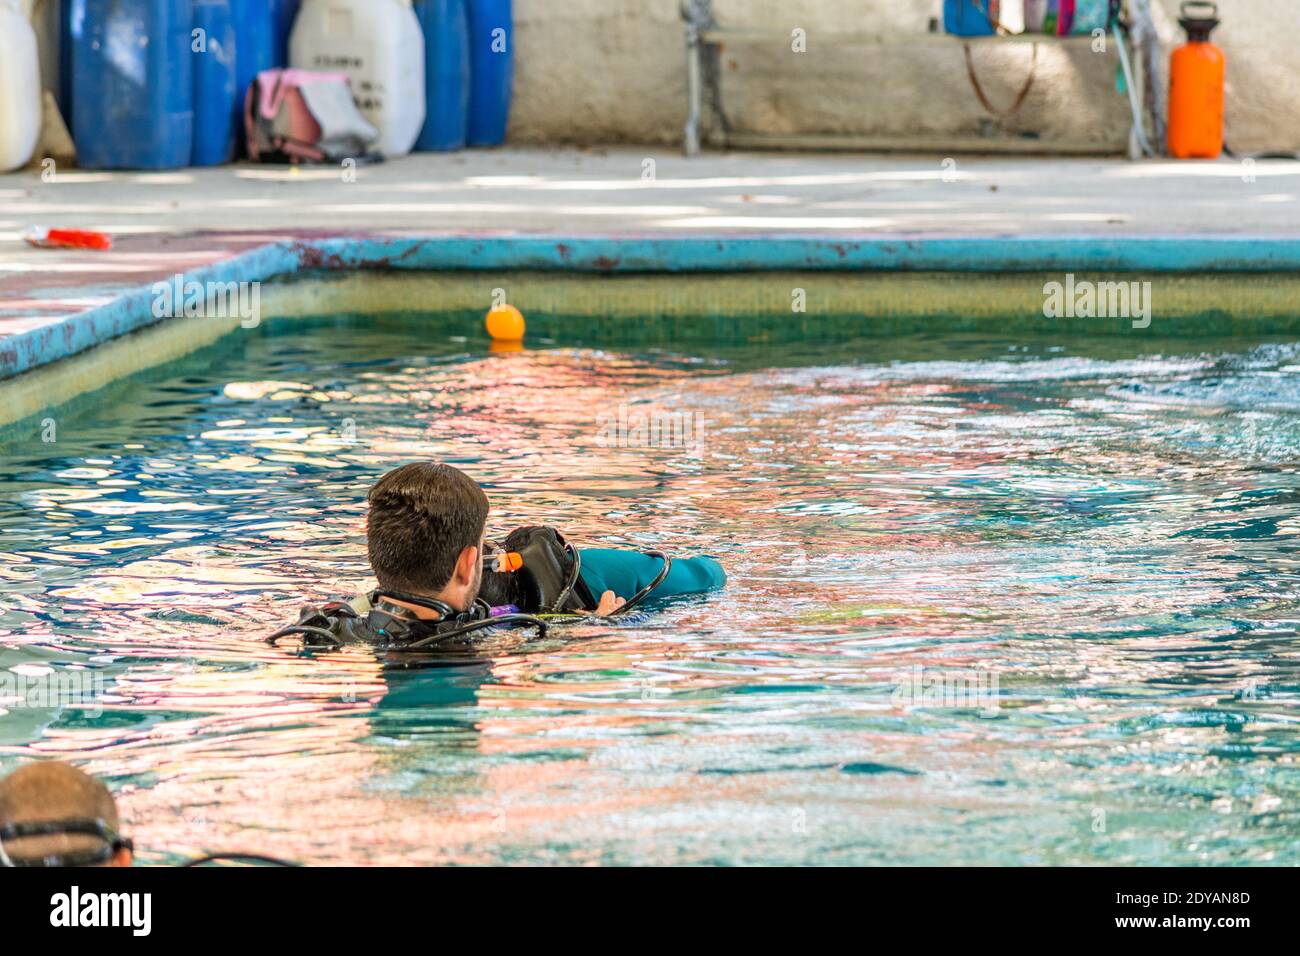 teacher diver helping a student swim during his class Stock Photo